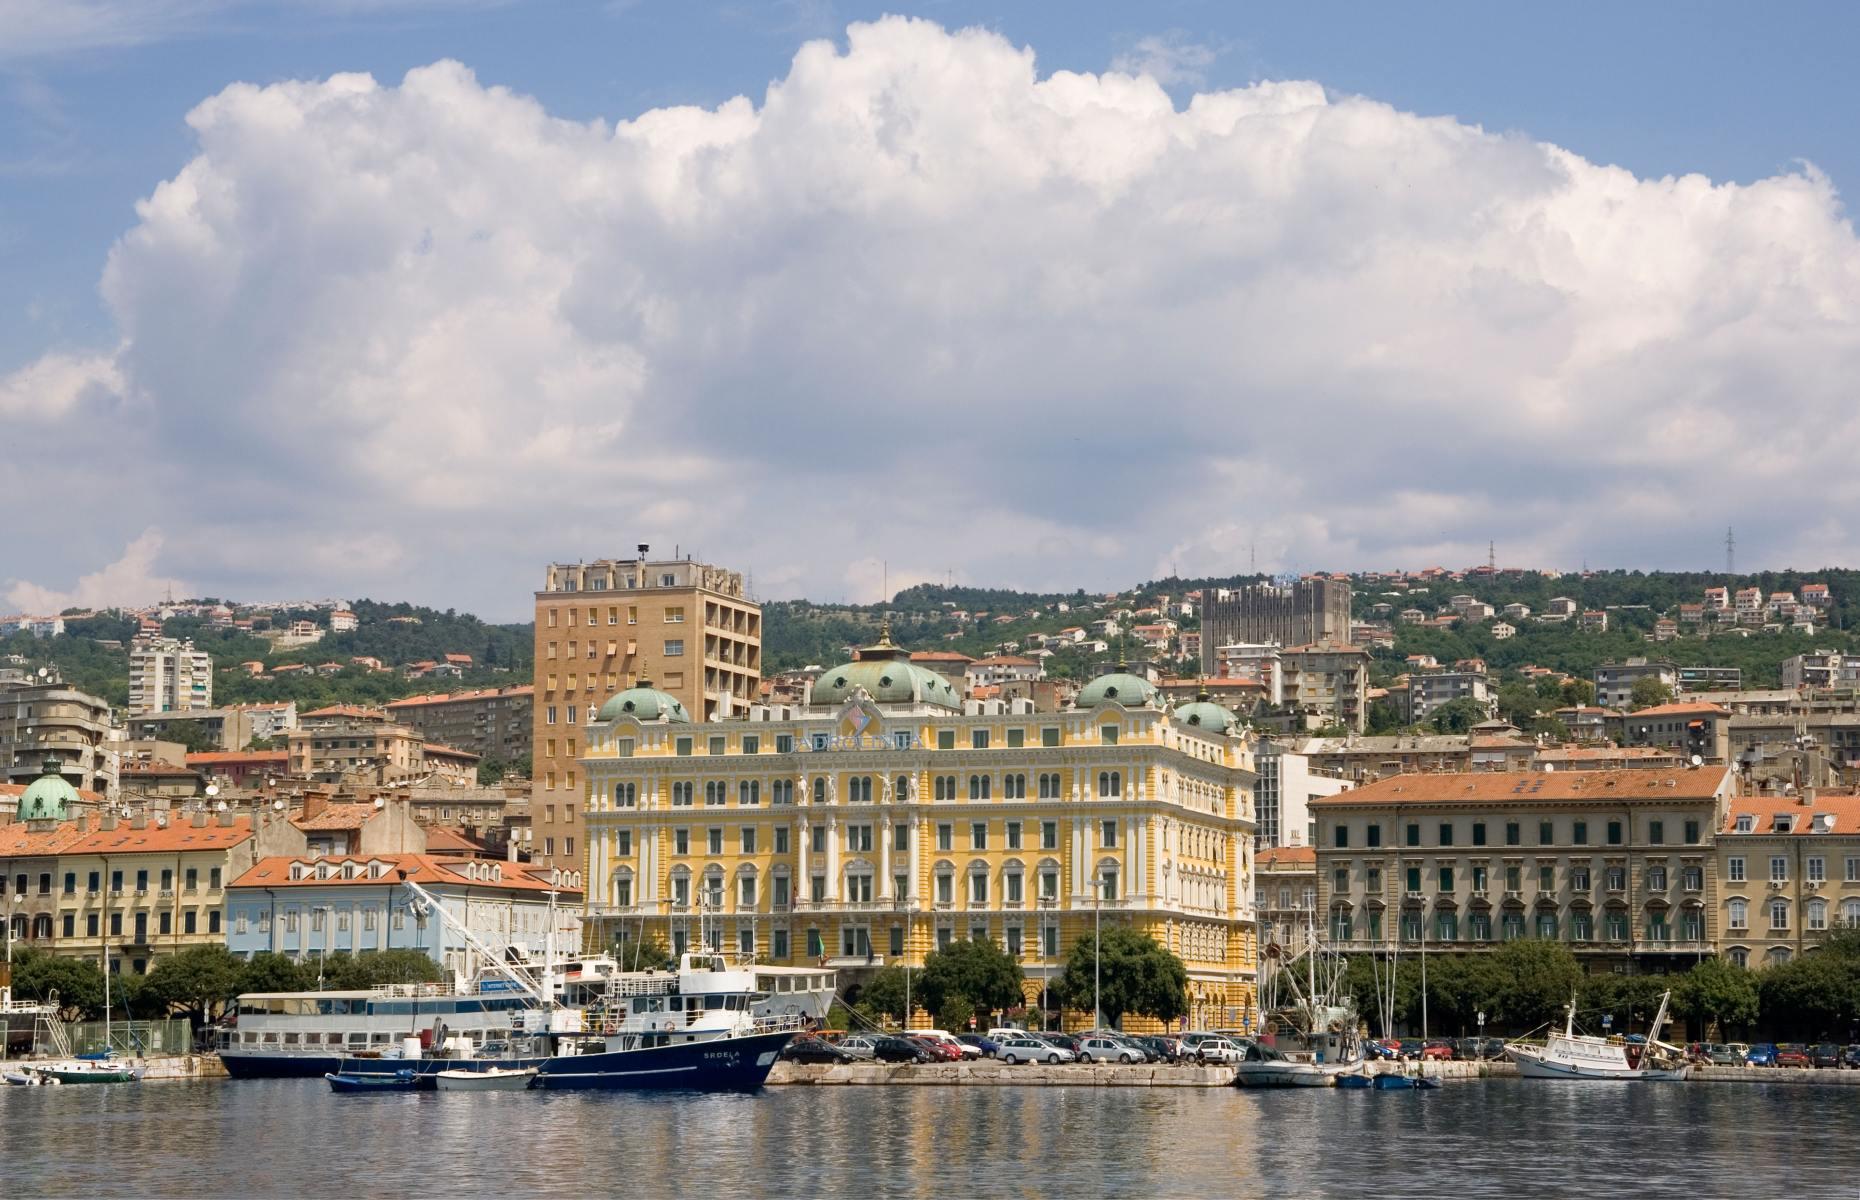 <p>Seasonally, the EuroNight from Stuttgart also runs as far as the Croatian city of Rijeka (pictured), located on Kvarner Bay – an inlet of the Adriatic Sea. The journey takes just under 15 hours and passes through some of the most beautiful landscapes Europe has to offer, from historic German spa towns to sweeping Slovenian countryside, before coming to rest in Rijeka, a former European Capital of Culture. </p>  <p><strong><a href="https://www.loveexploring.com/news/175051/11-top-moneysaving-tips-for-rail-travellers-this-year">Here are our top money-saving tips for rail travelers</a></strong></p>